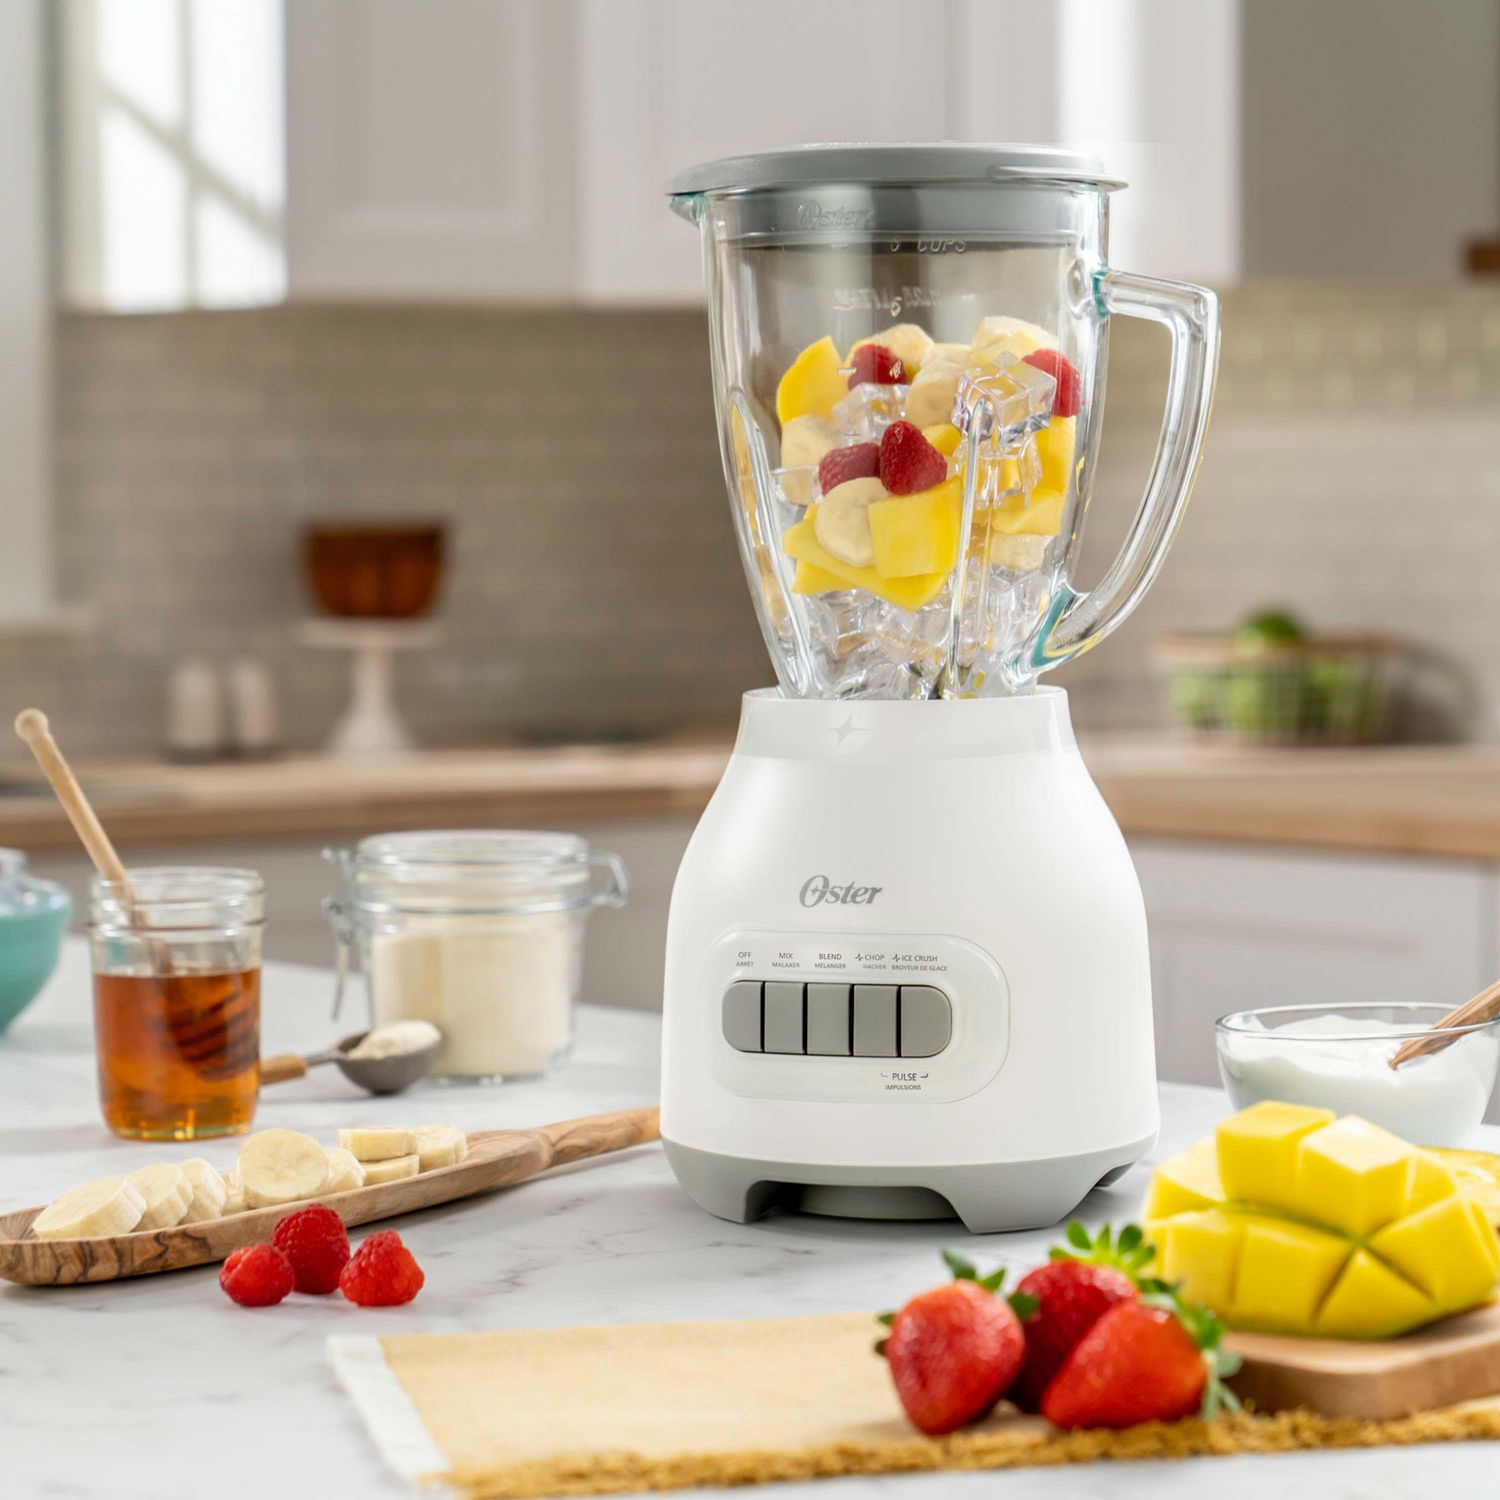 Oster 2142483 Easy-to-Clean Smoothie Blender with Dishwasher-Safe